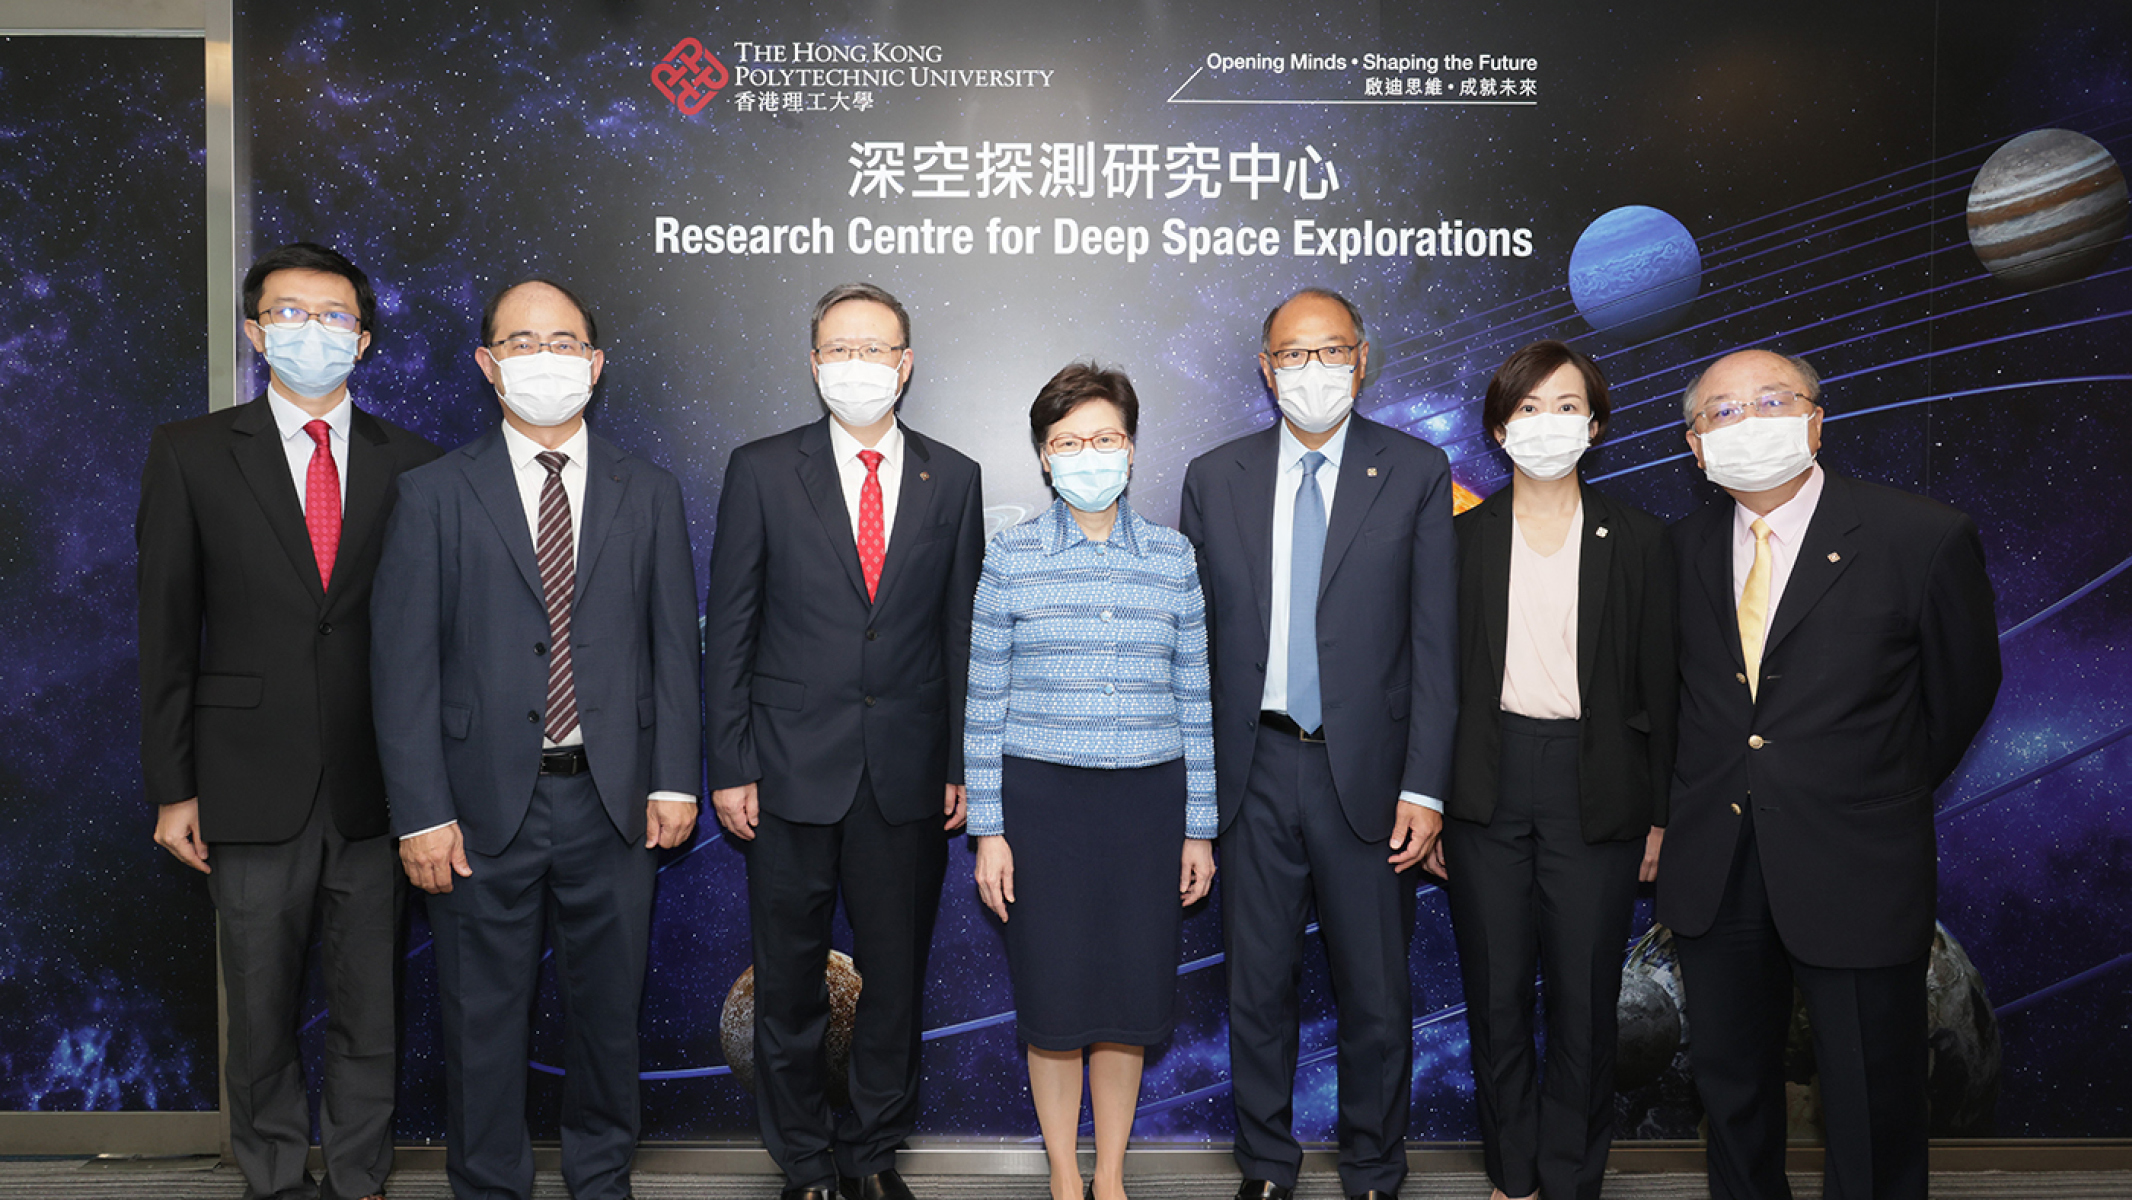 Mrs Lam (centre) toured the Precision Robotics Laboratory of the Research Centre for Deep Space Exploration, accompanied by PolyU Council Chairman Dr Lam Tai-fai (third from right), President Professor Jin-Guang Teng (third from left), and other senior members of the University.